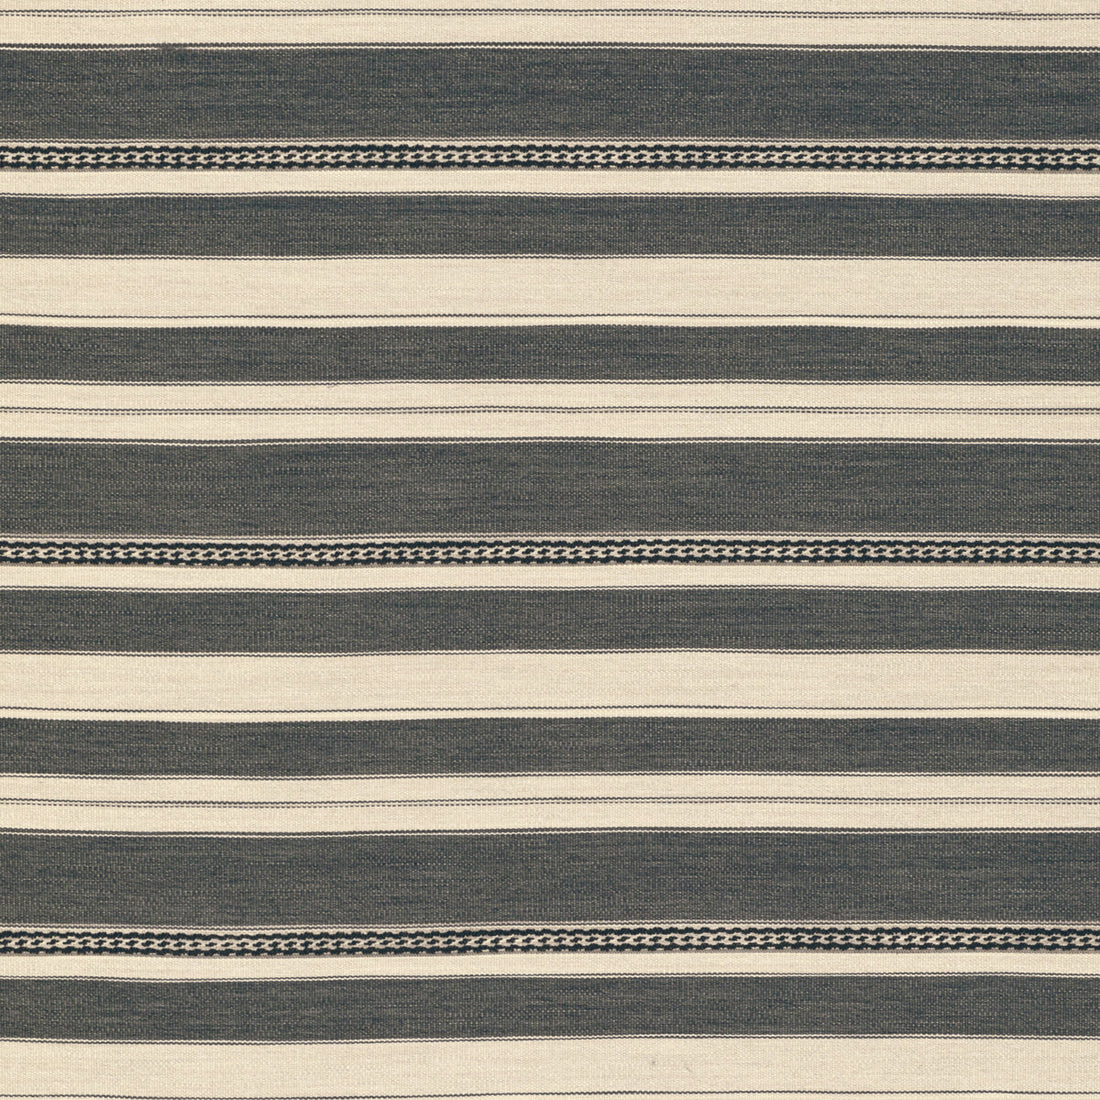 Entoto Stripe fabric in grey/ebony color - pattern 2017143.118.0 - by Lee Jofa in the Merkato collection